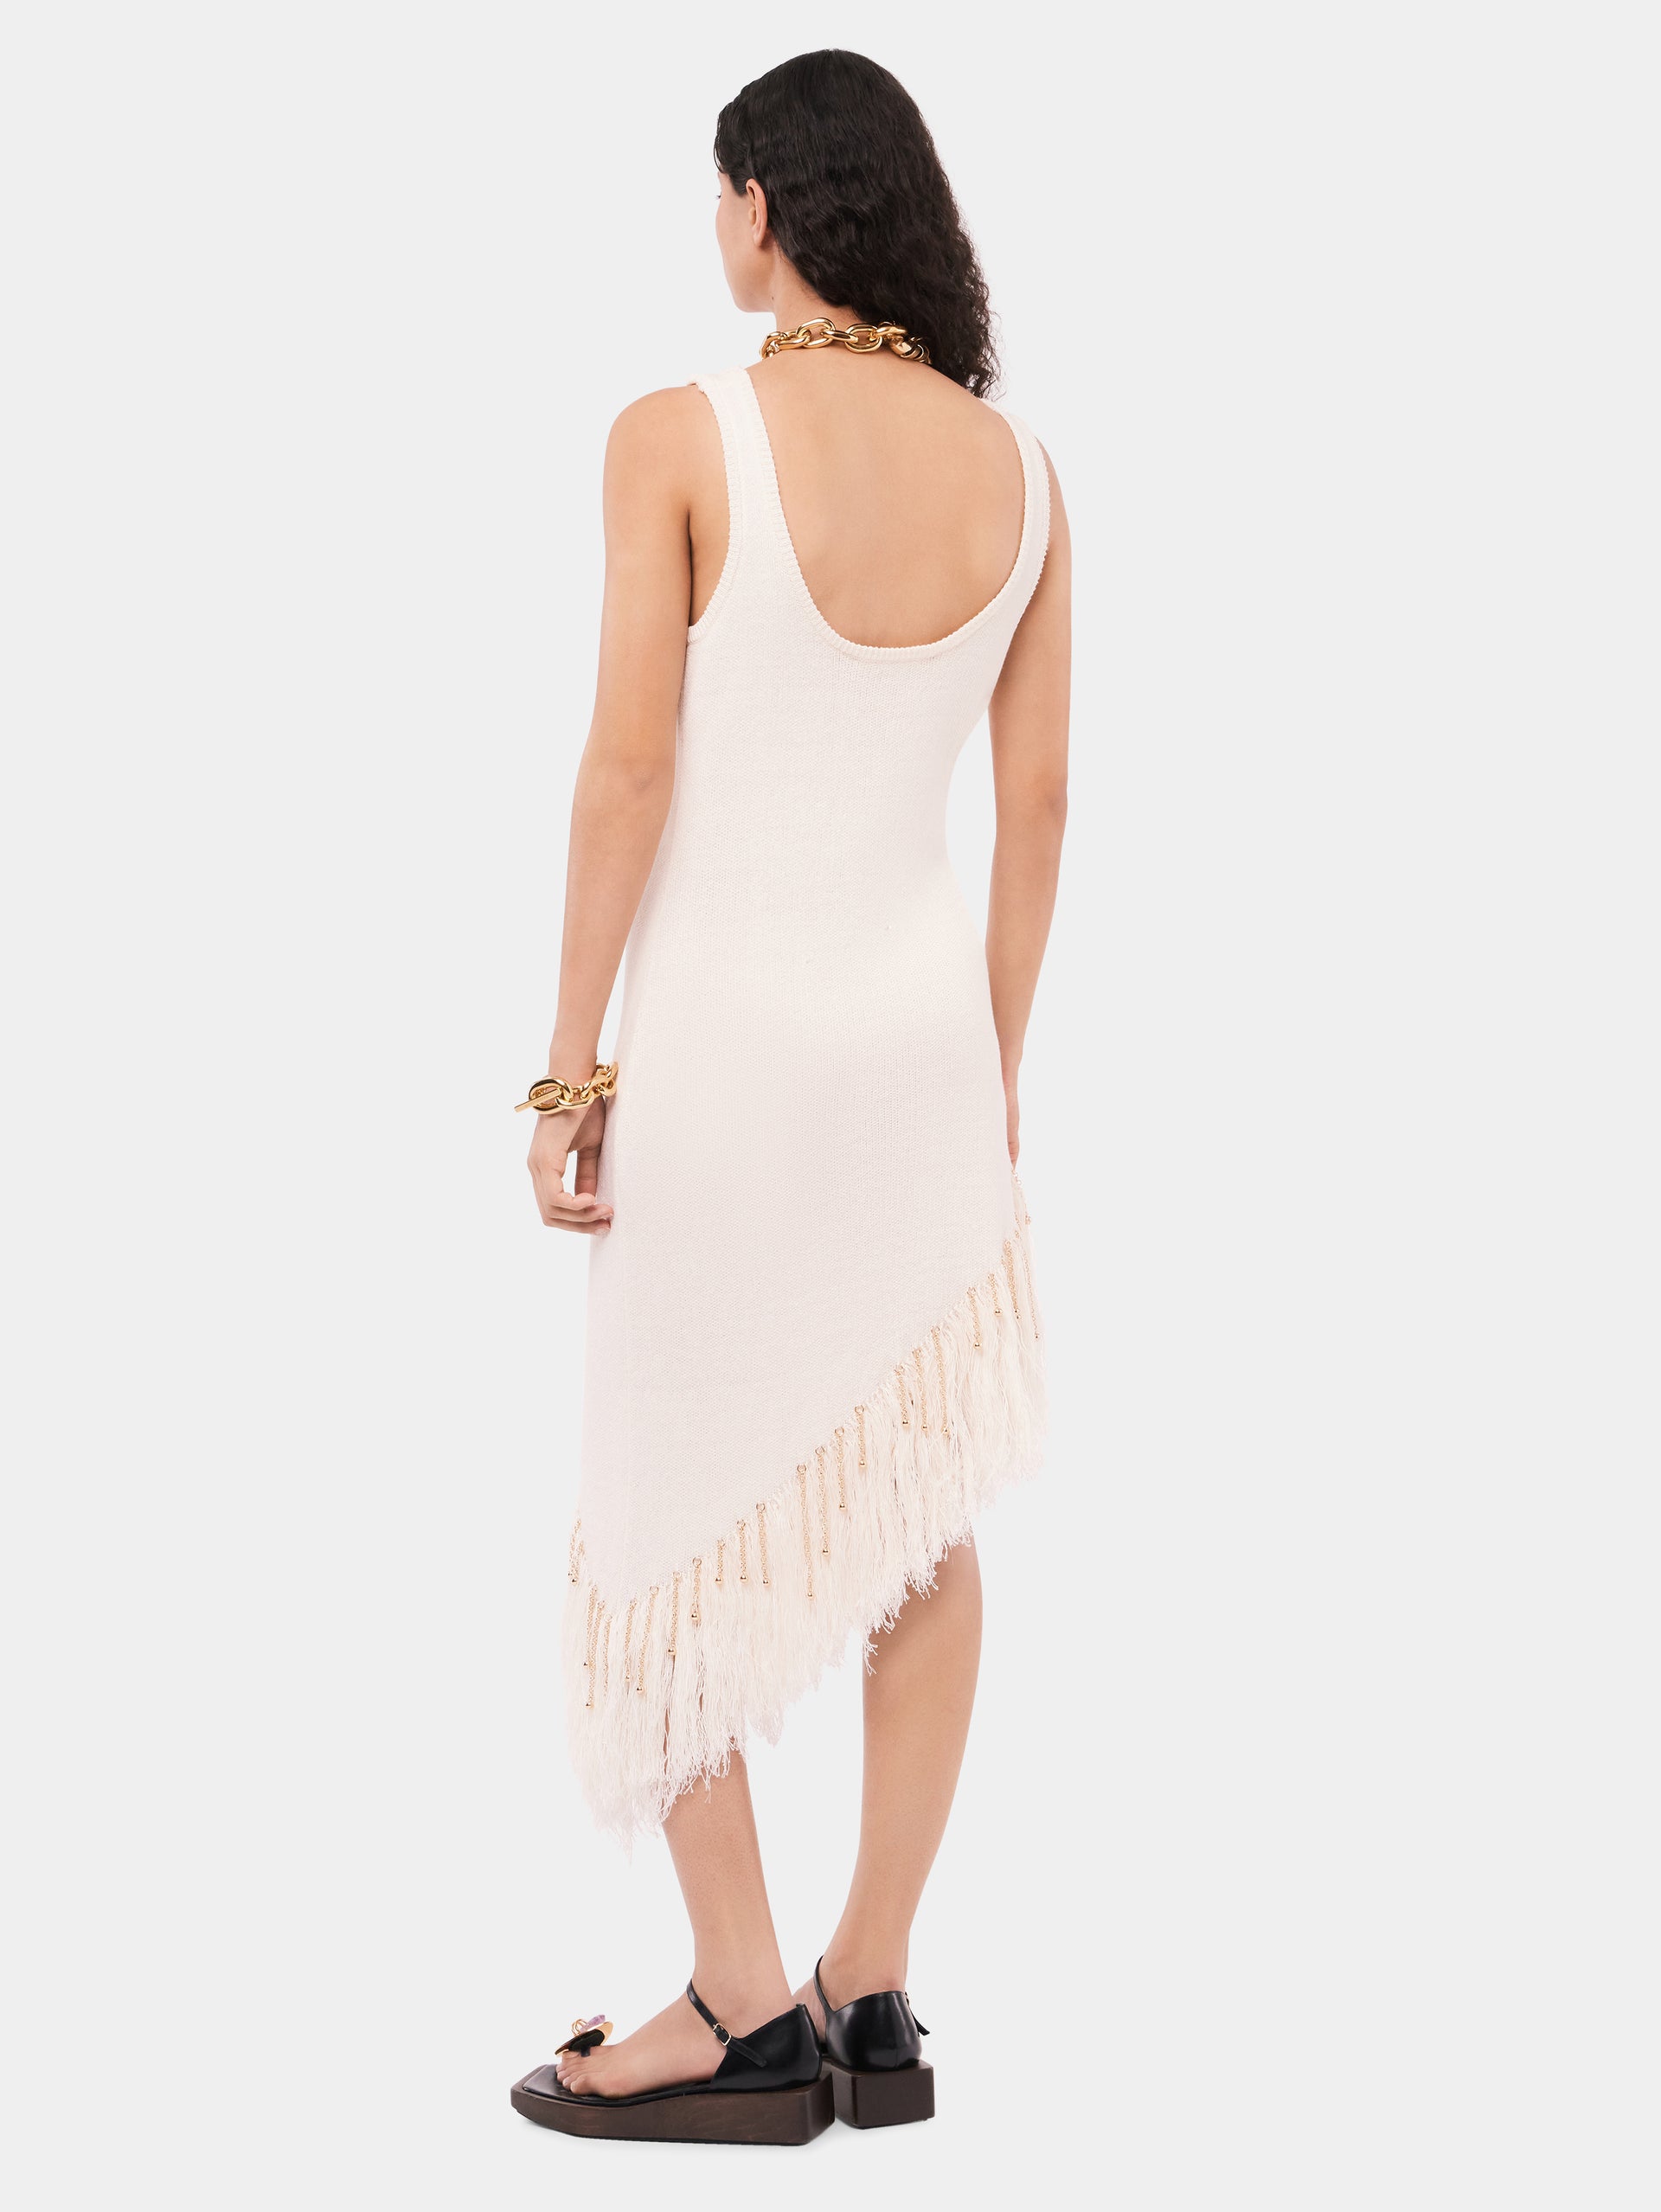 Asymmetrical off white woven dress with knitted beads and feathers